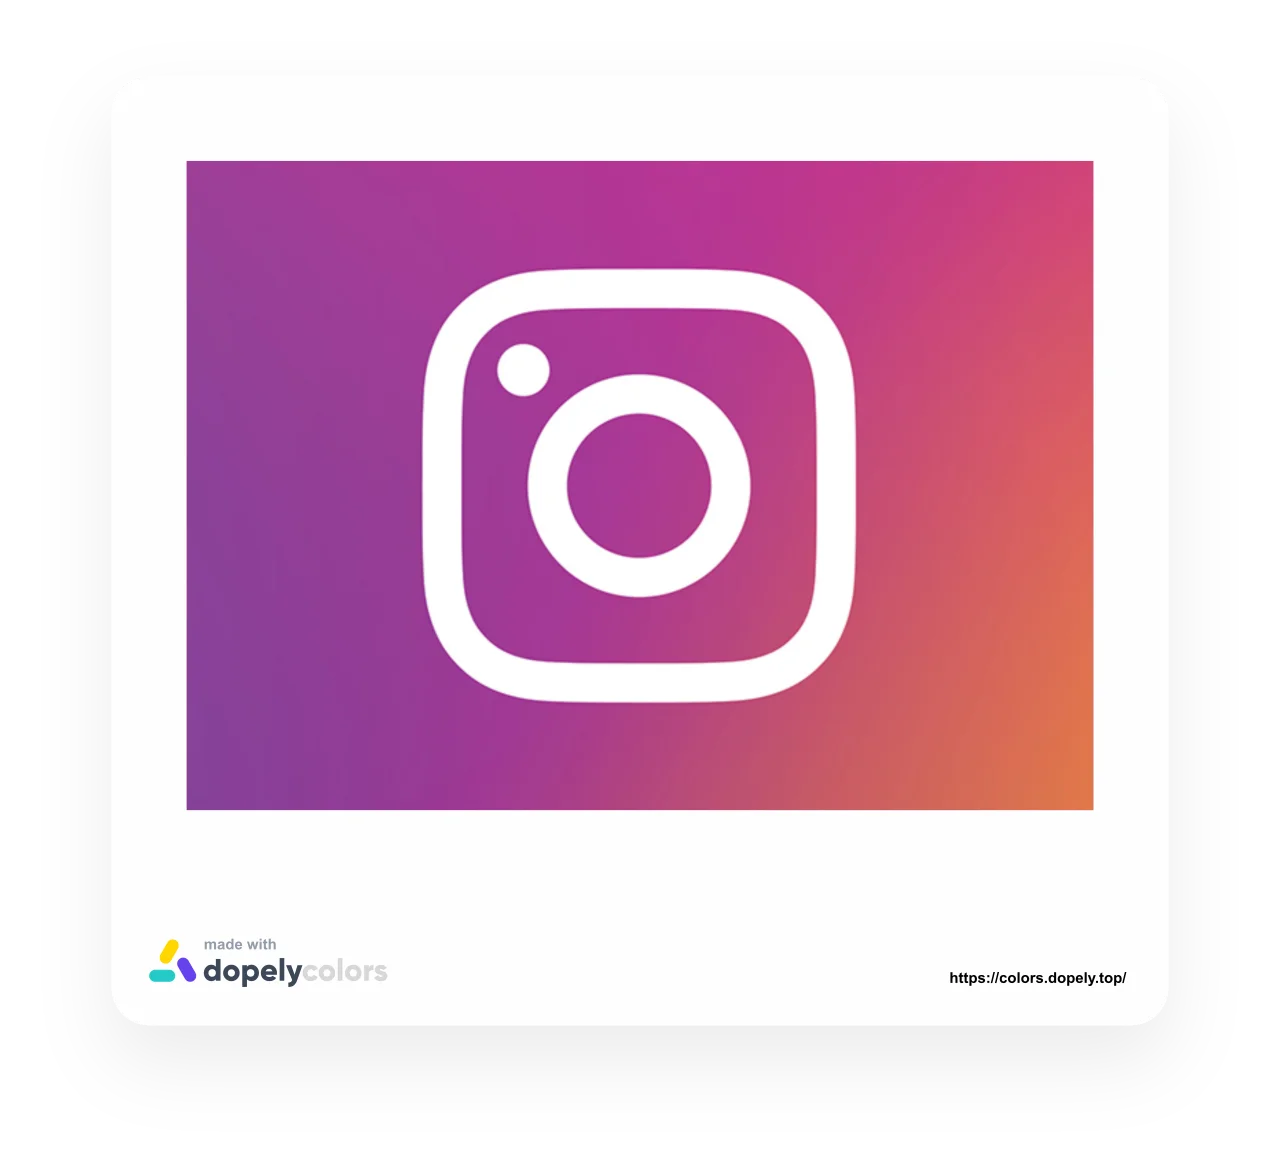 an example of gradient in logos like instagram icon